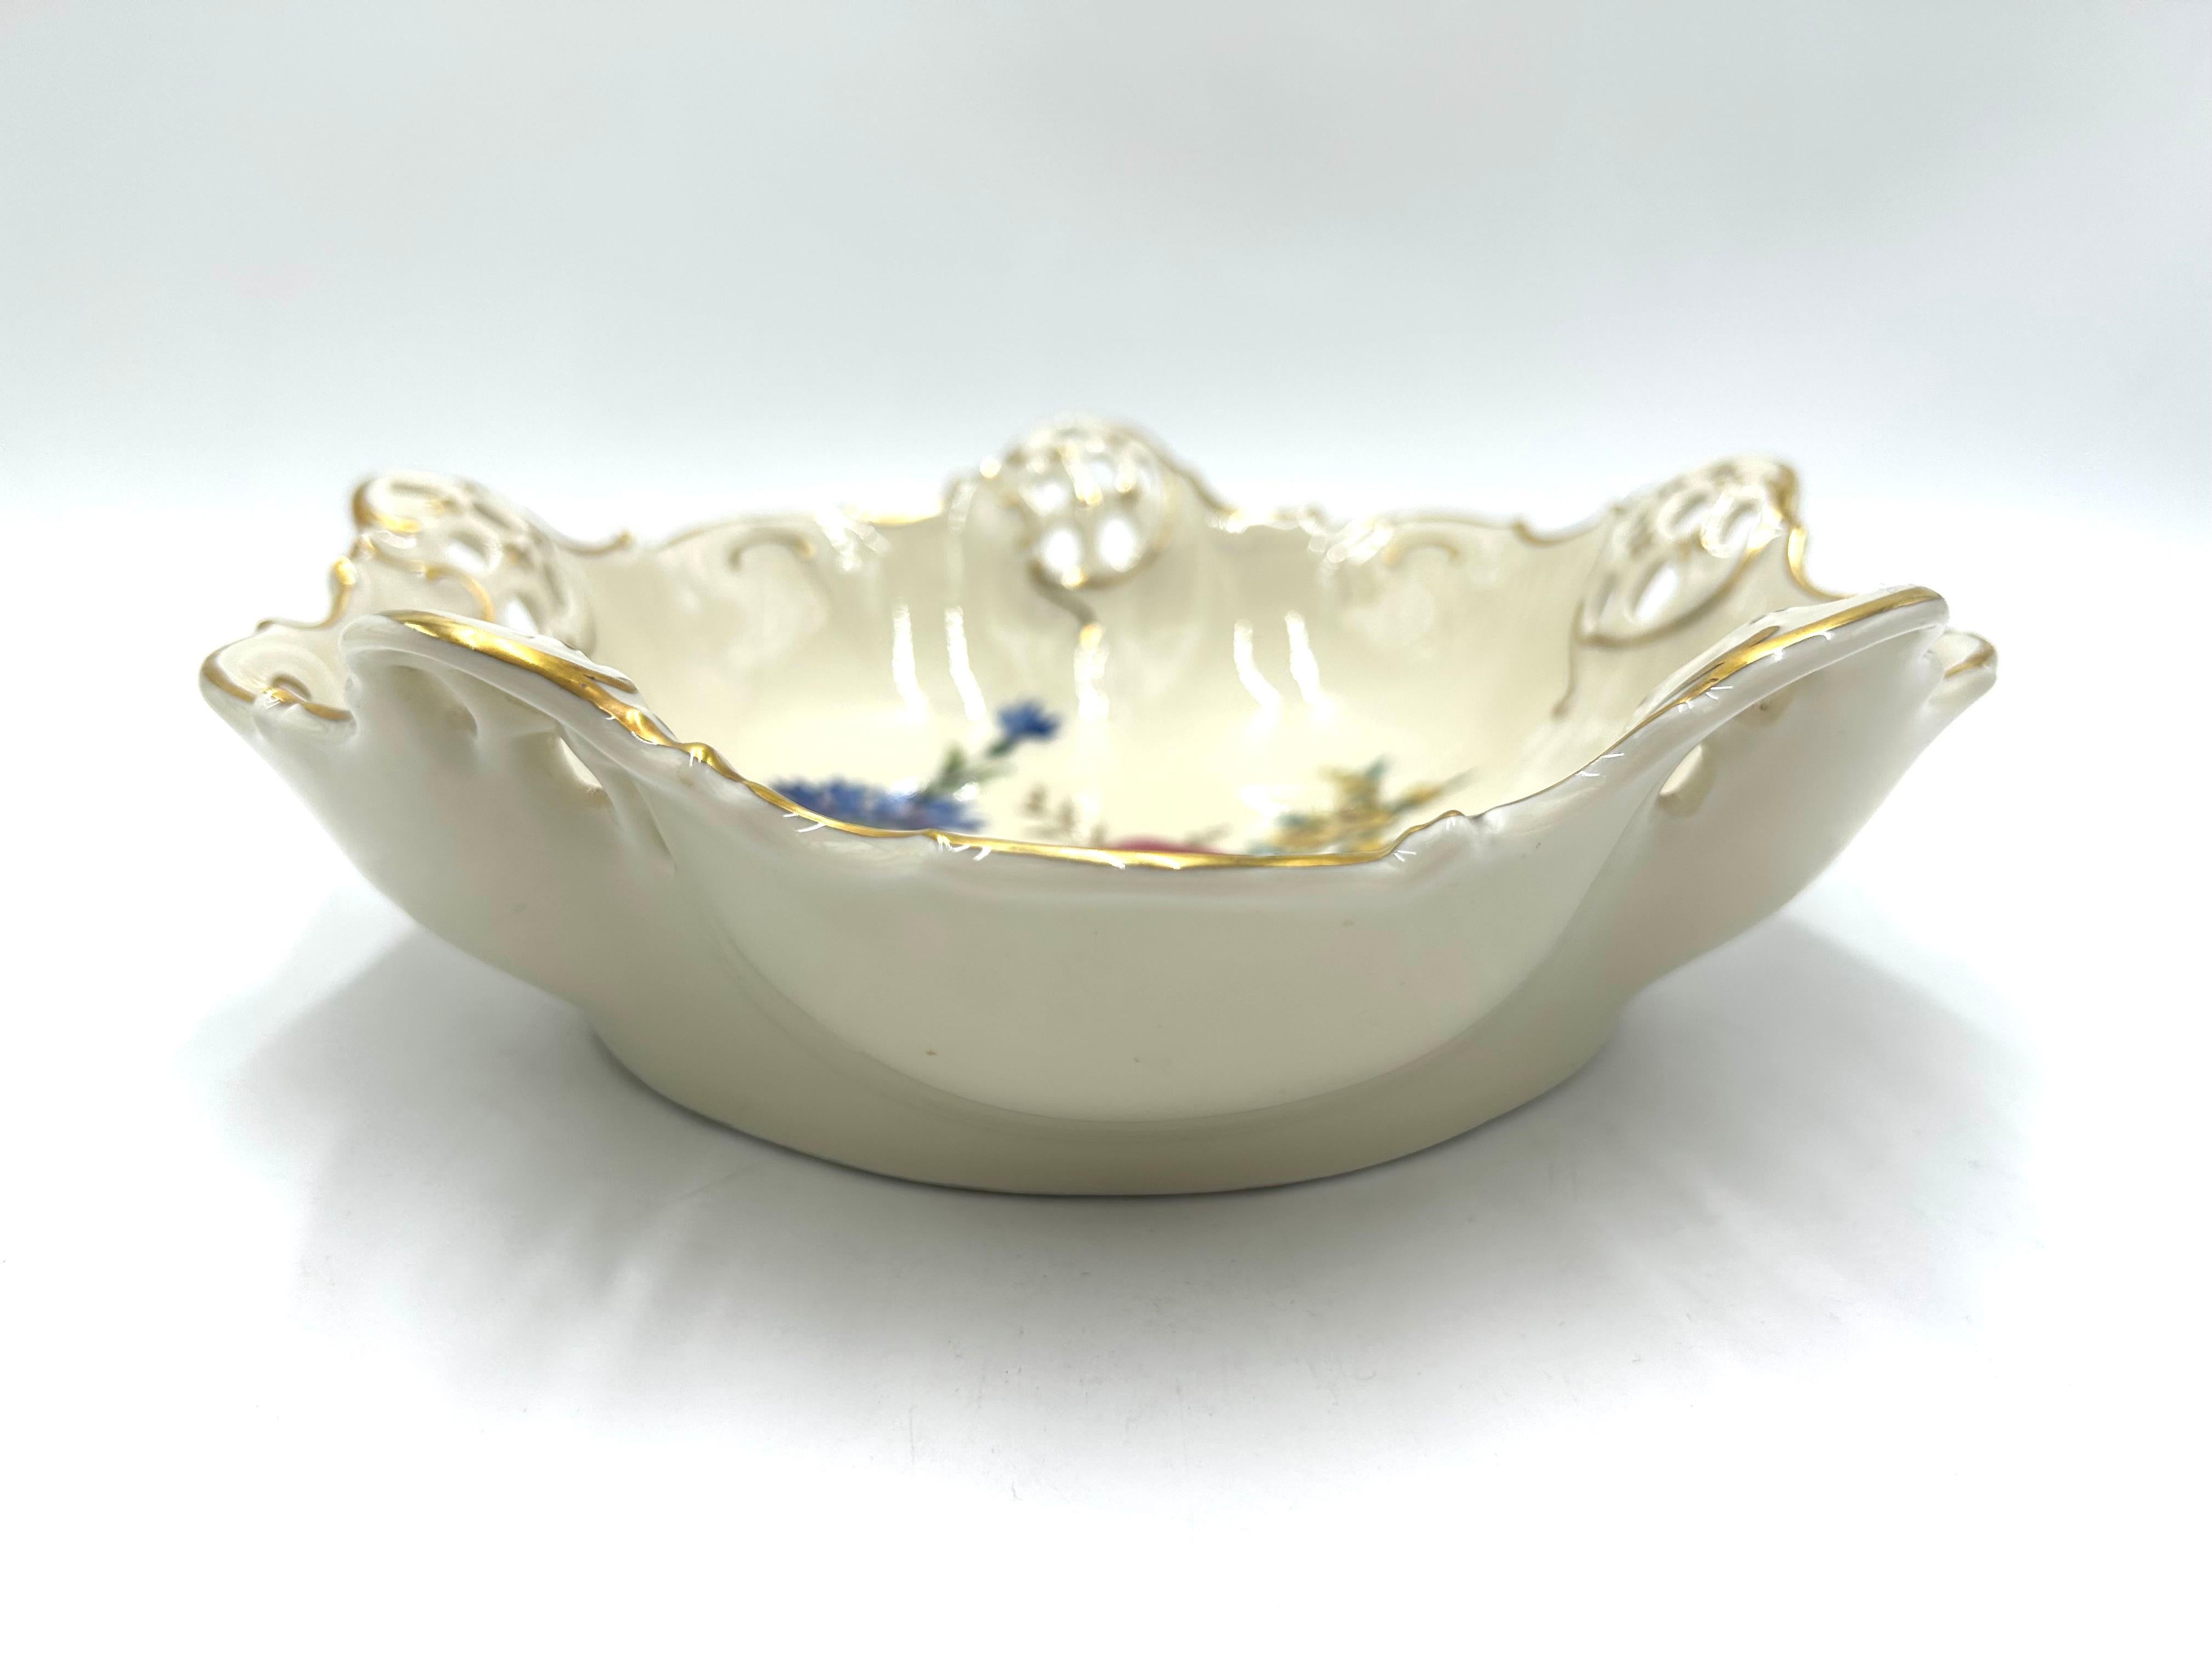 Porcelain openwork bowl made of ecru porcelain, decorated with gilding and a bouquet of flowers motif. A product of the valued German manufacturer Rosenthal. Signed with a mark from 1944.
The bowl has damage in the form of a hairline crack on one